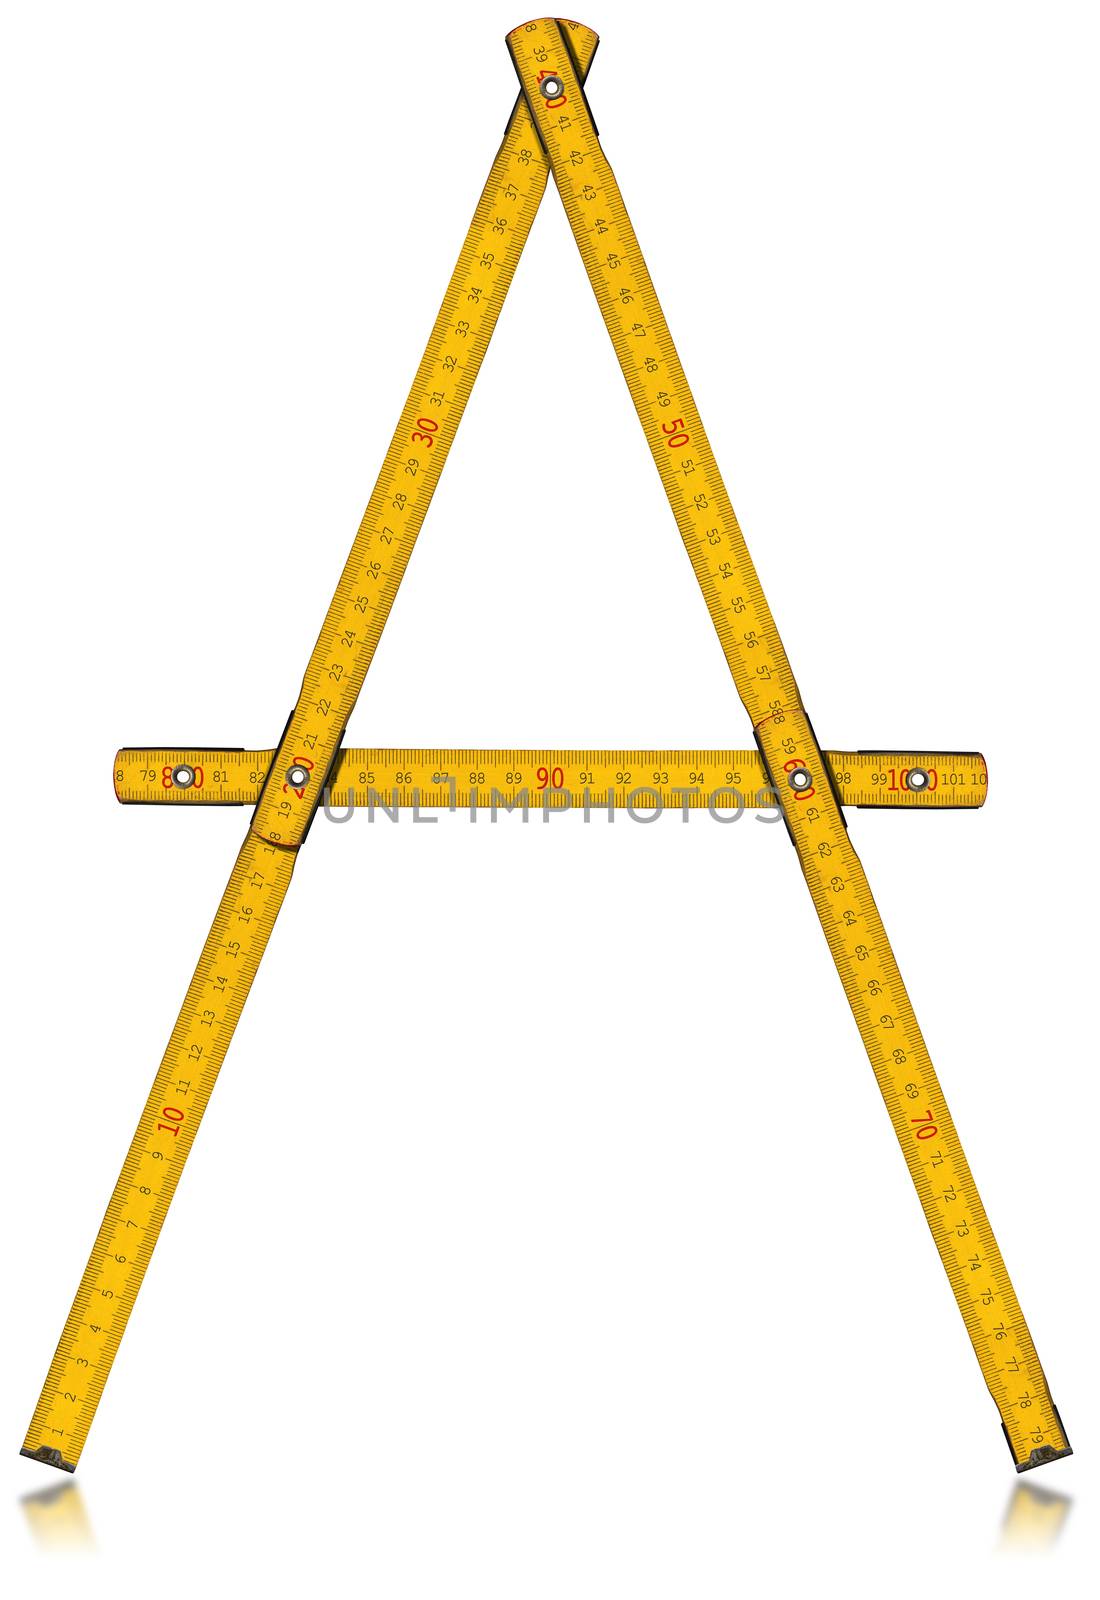 Font A - Old Yellow Meter Ruler by catalby